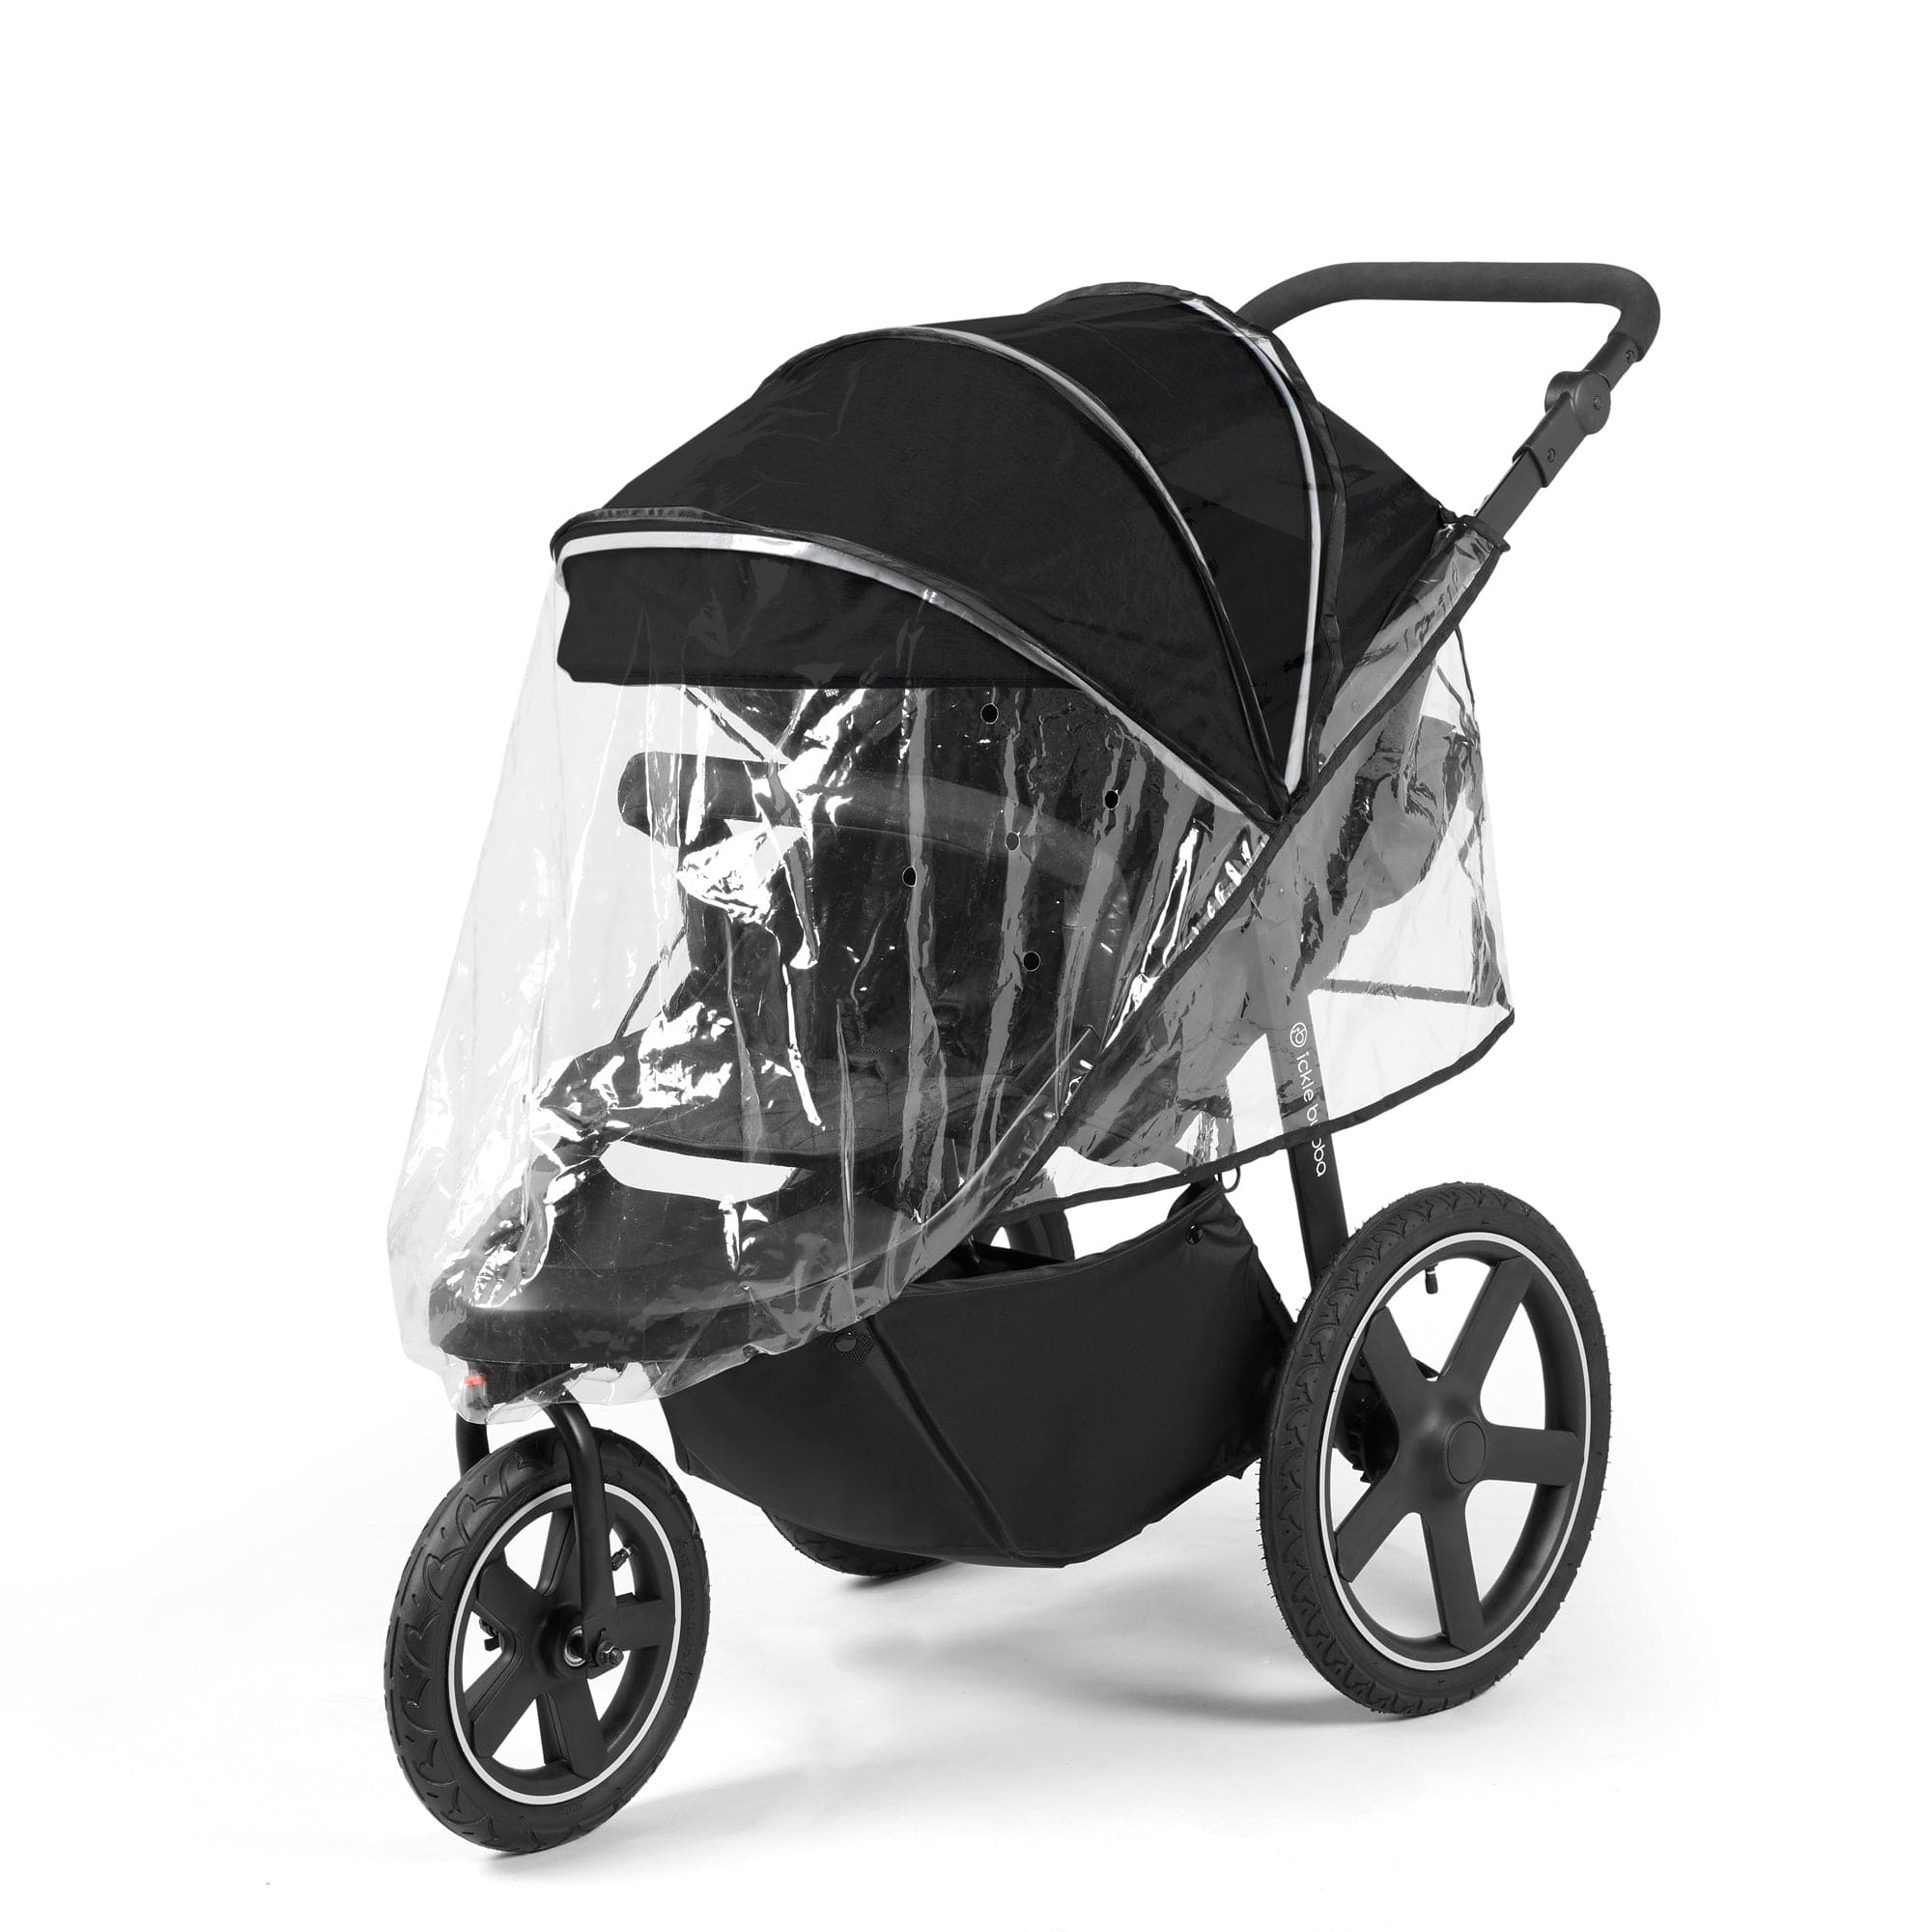 Ickle Bubba 3 wheel pushchairs Ickle Bubba Venus Prime Jogger Stroller I-Size Travel System - Black/Black with Base 13-004-600-001